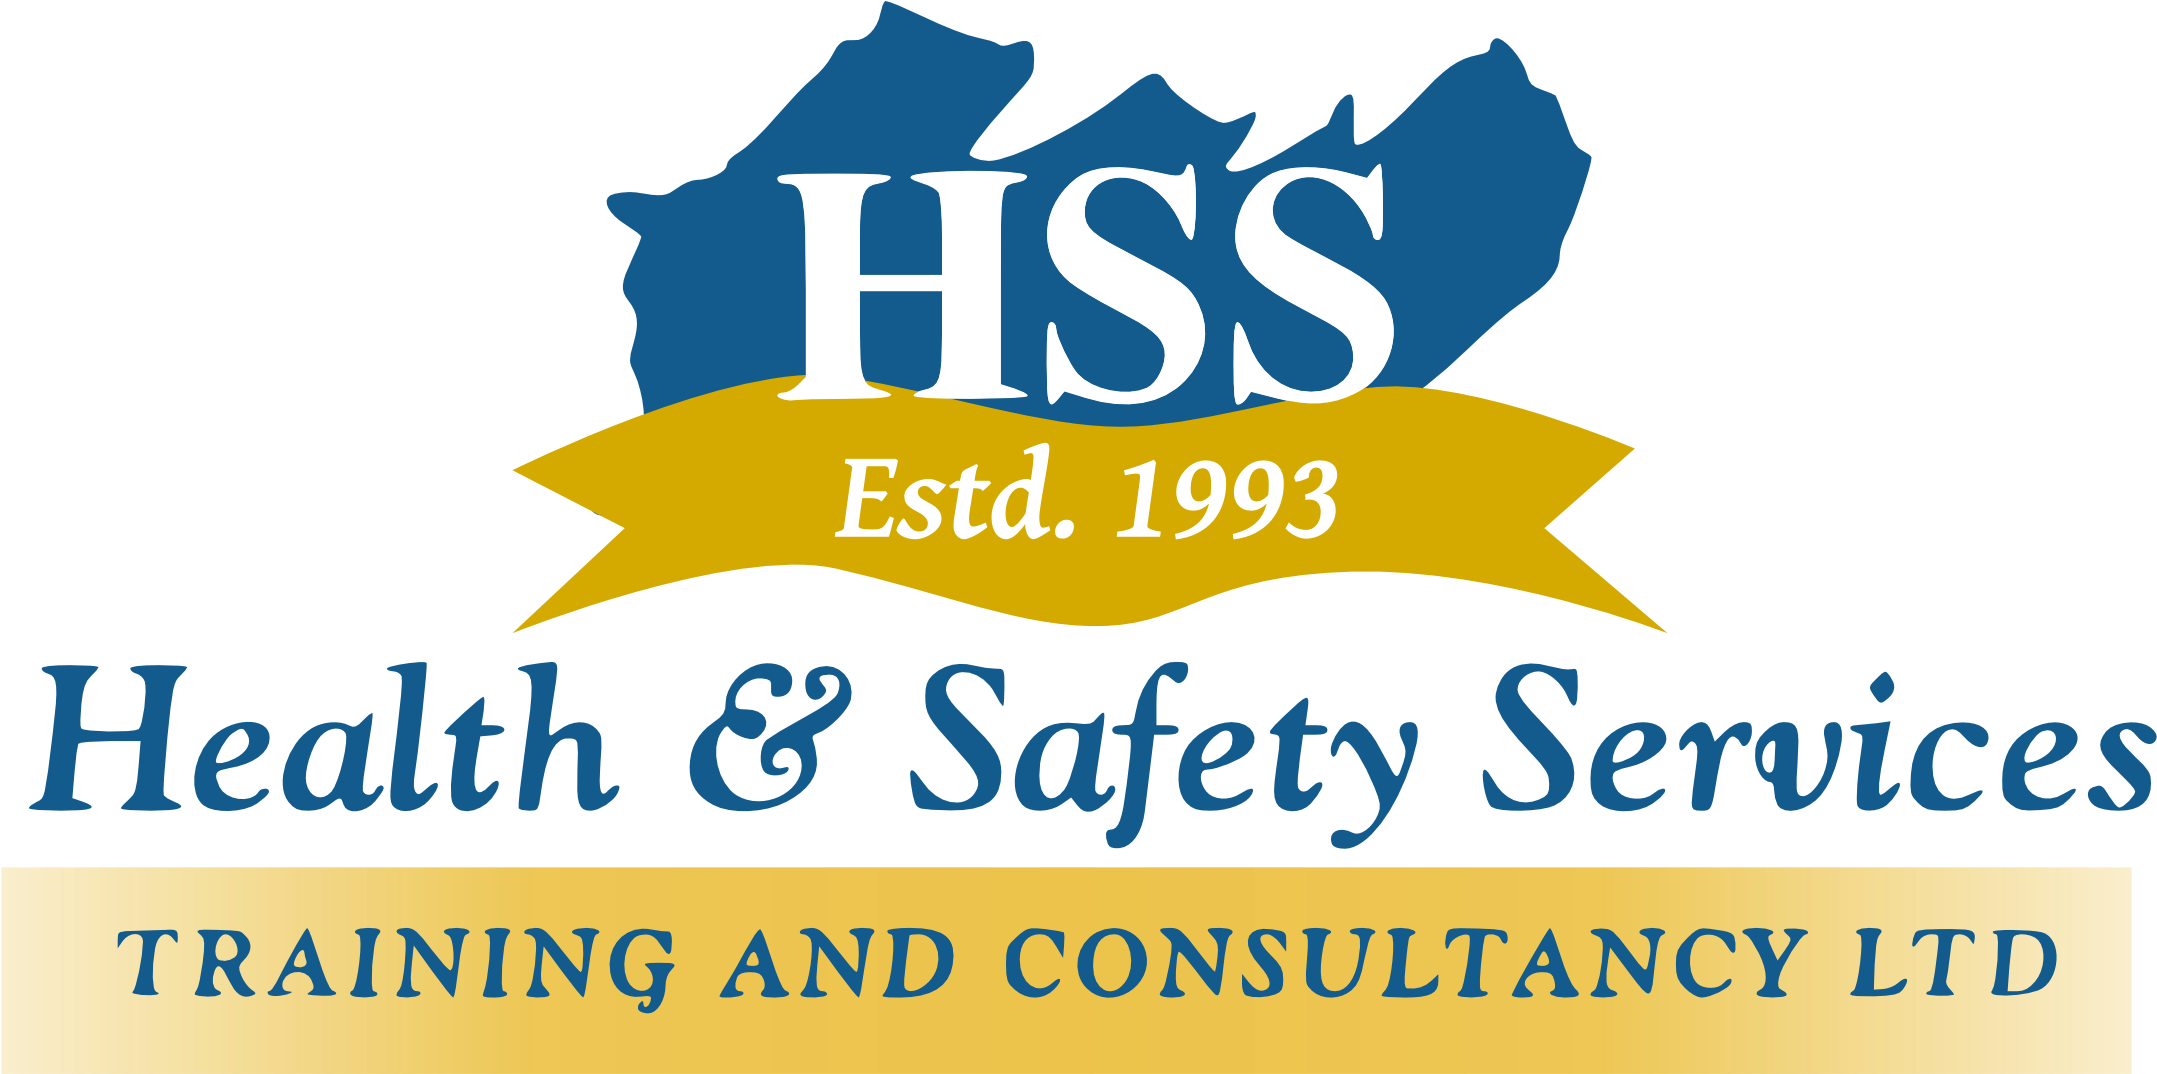 [fire Safety Training] - Health And Safety Certificate Ireland (2667x1333)